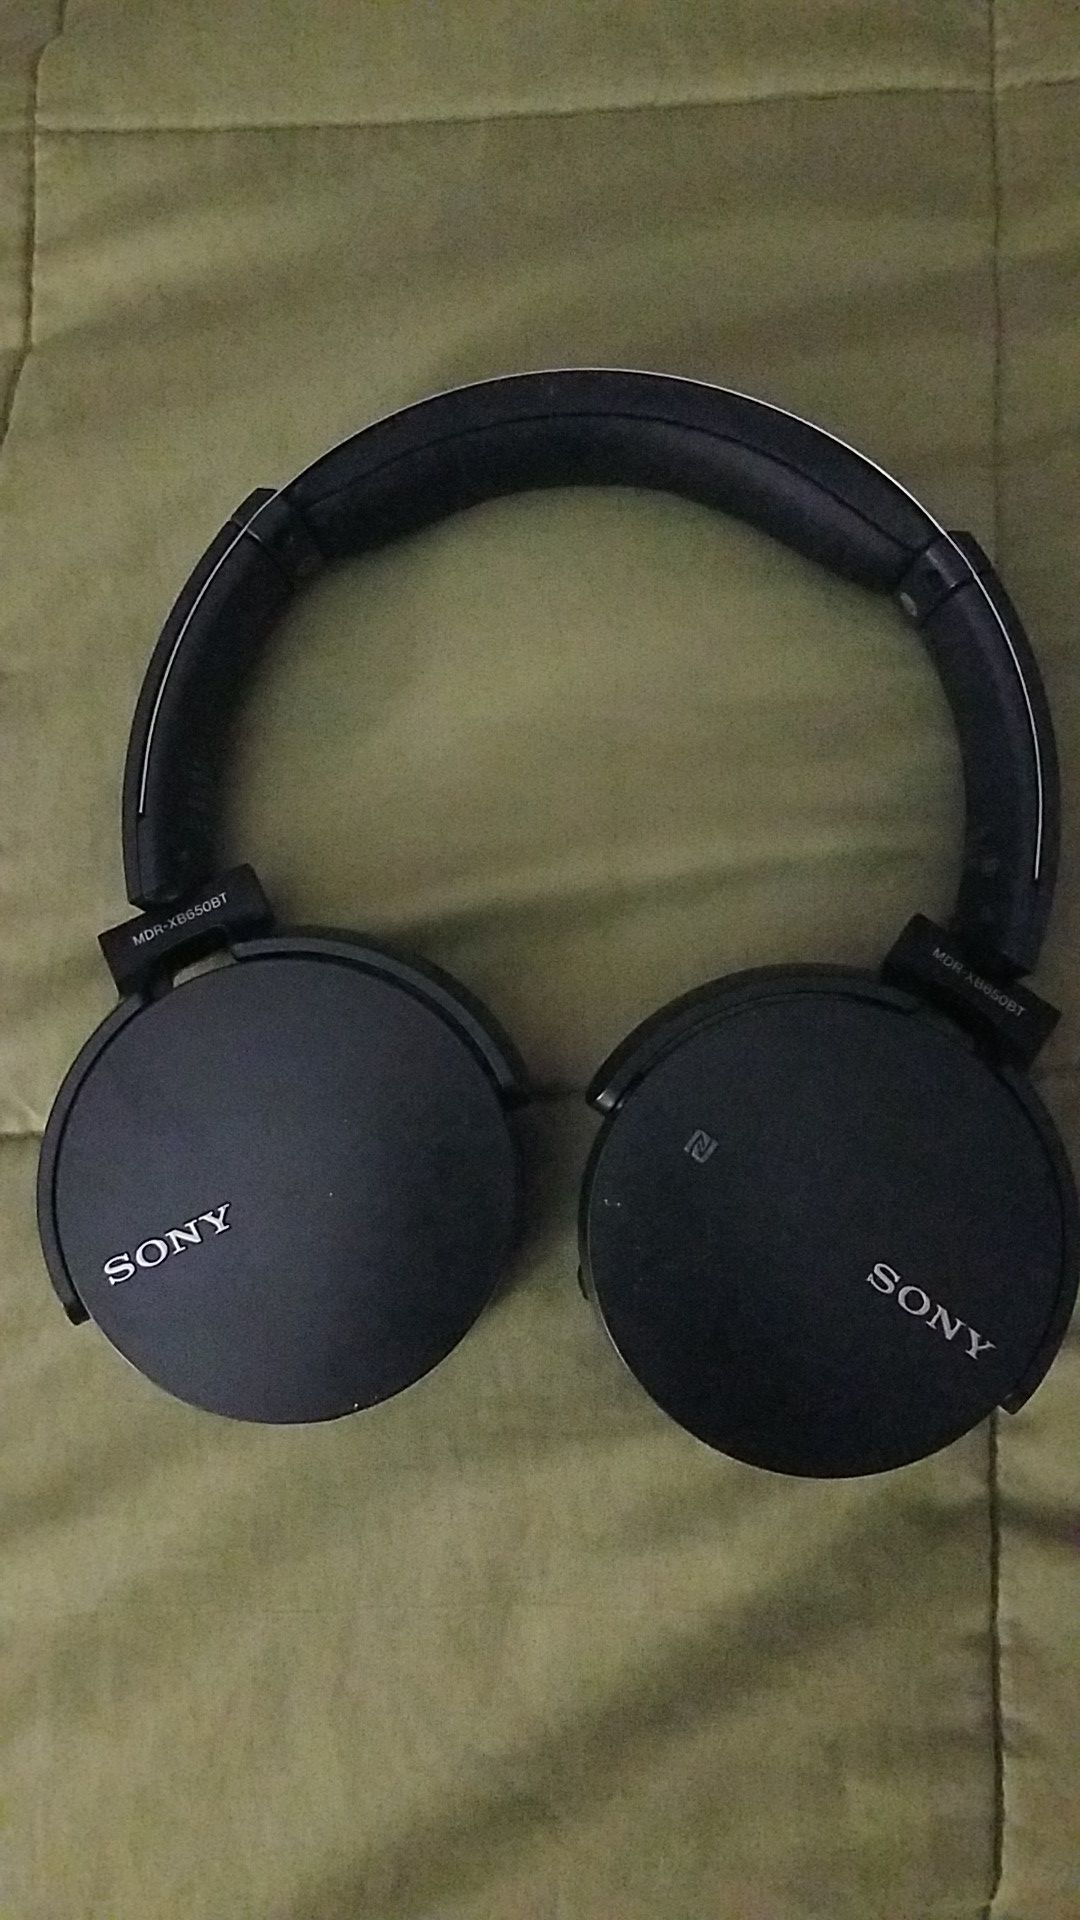 Sony mdr bass boost headphones